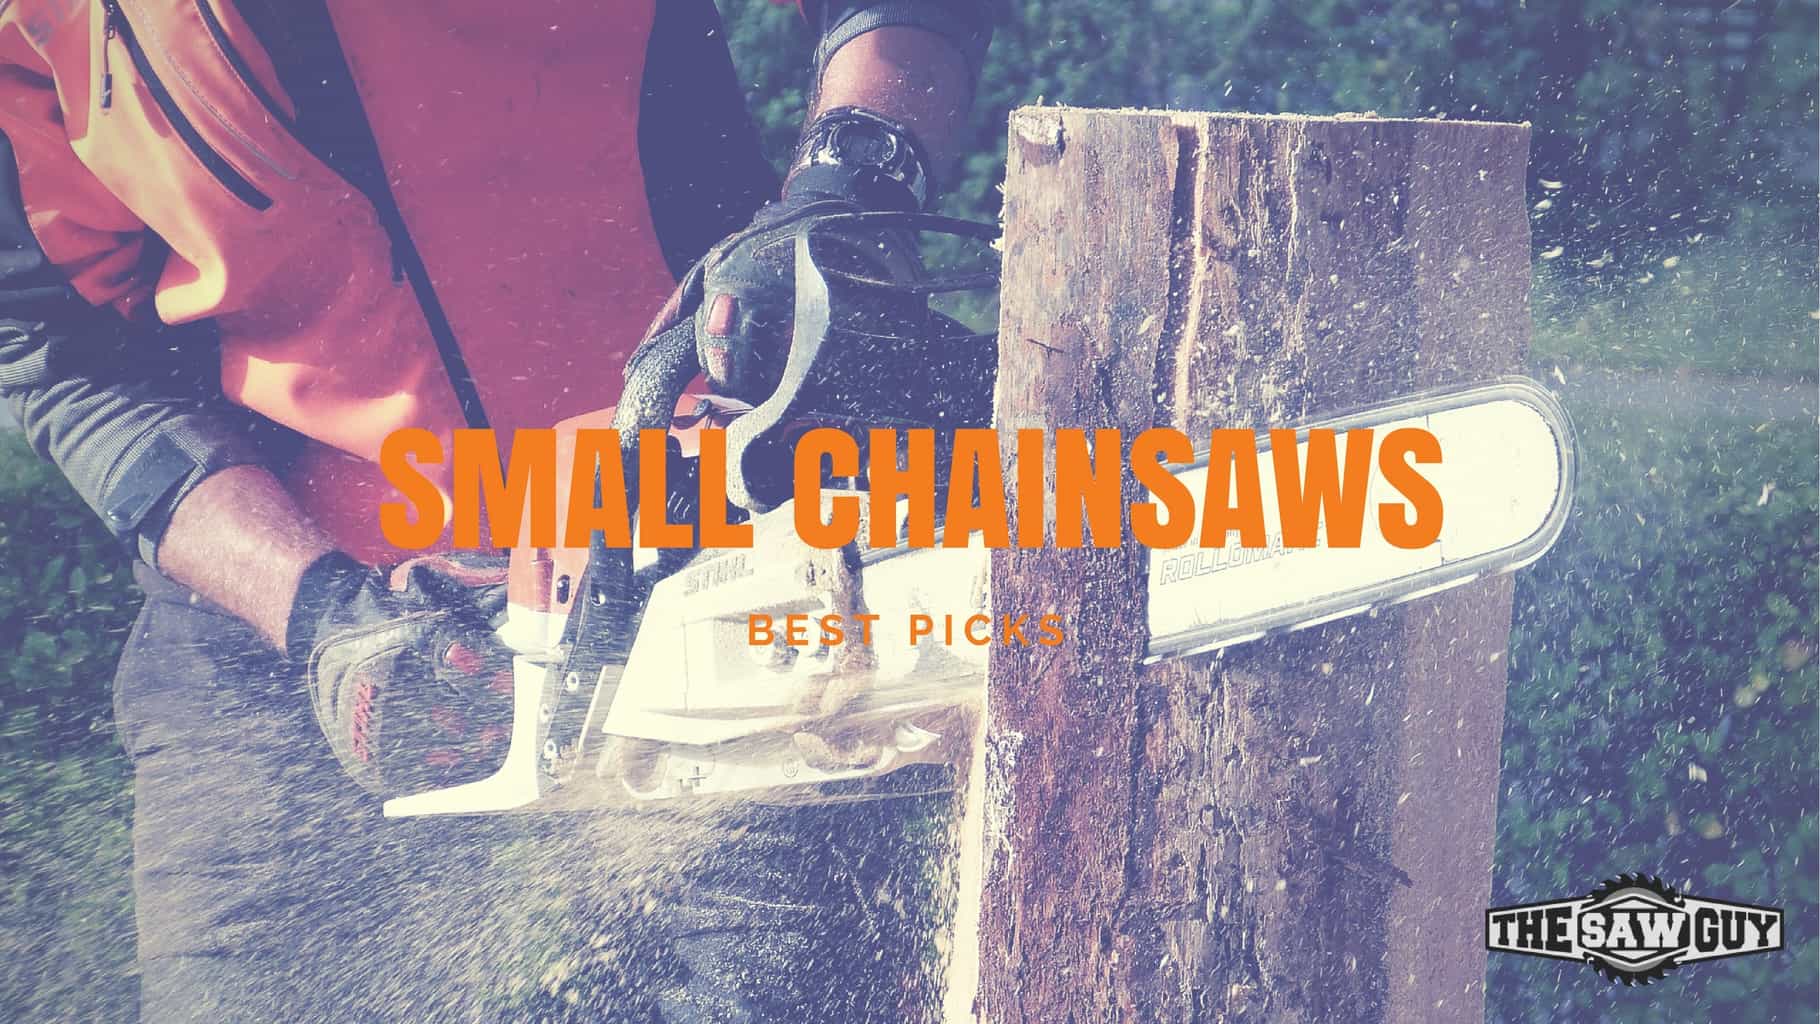 The 5 Best Small Chainsaws